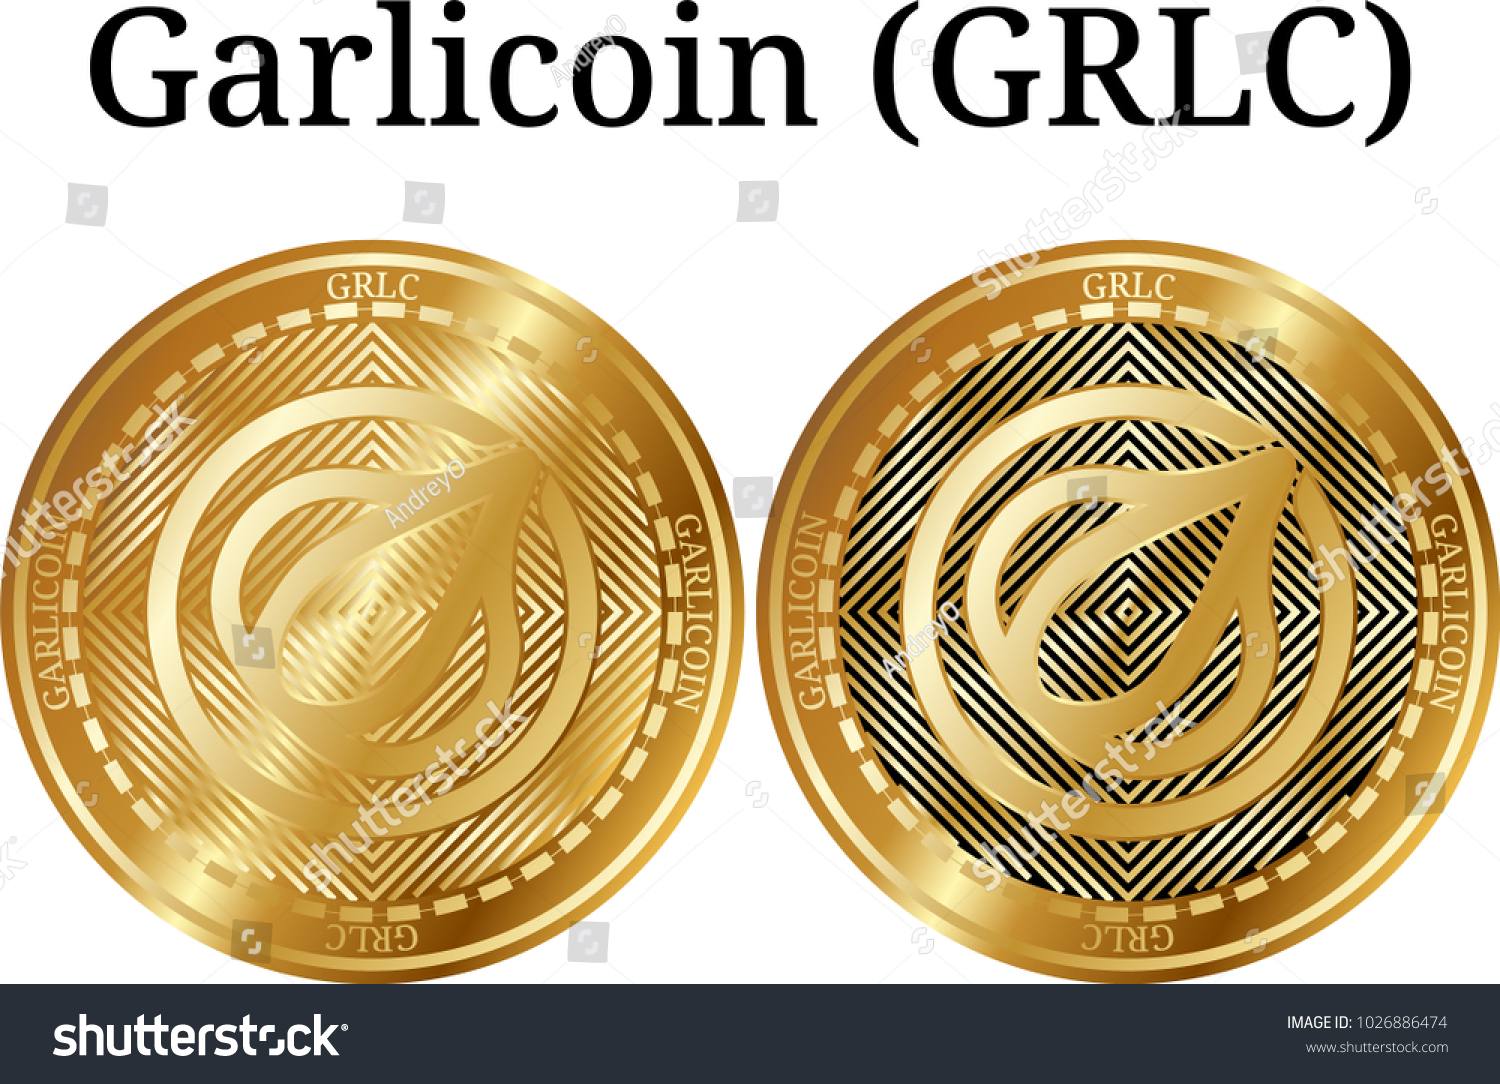 Garlic in cryptocurrency buy bitcoin with usd wallet